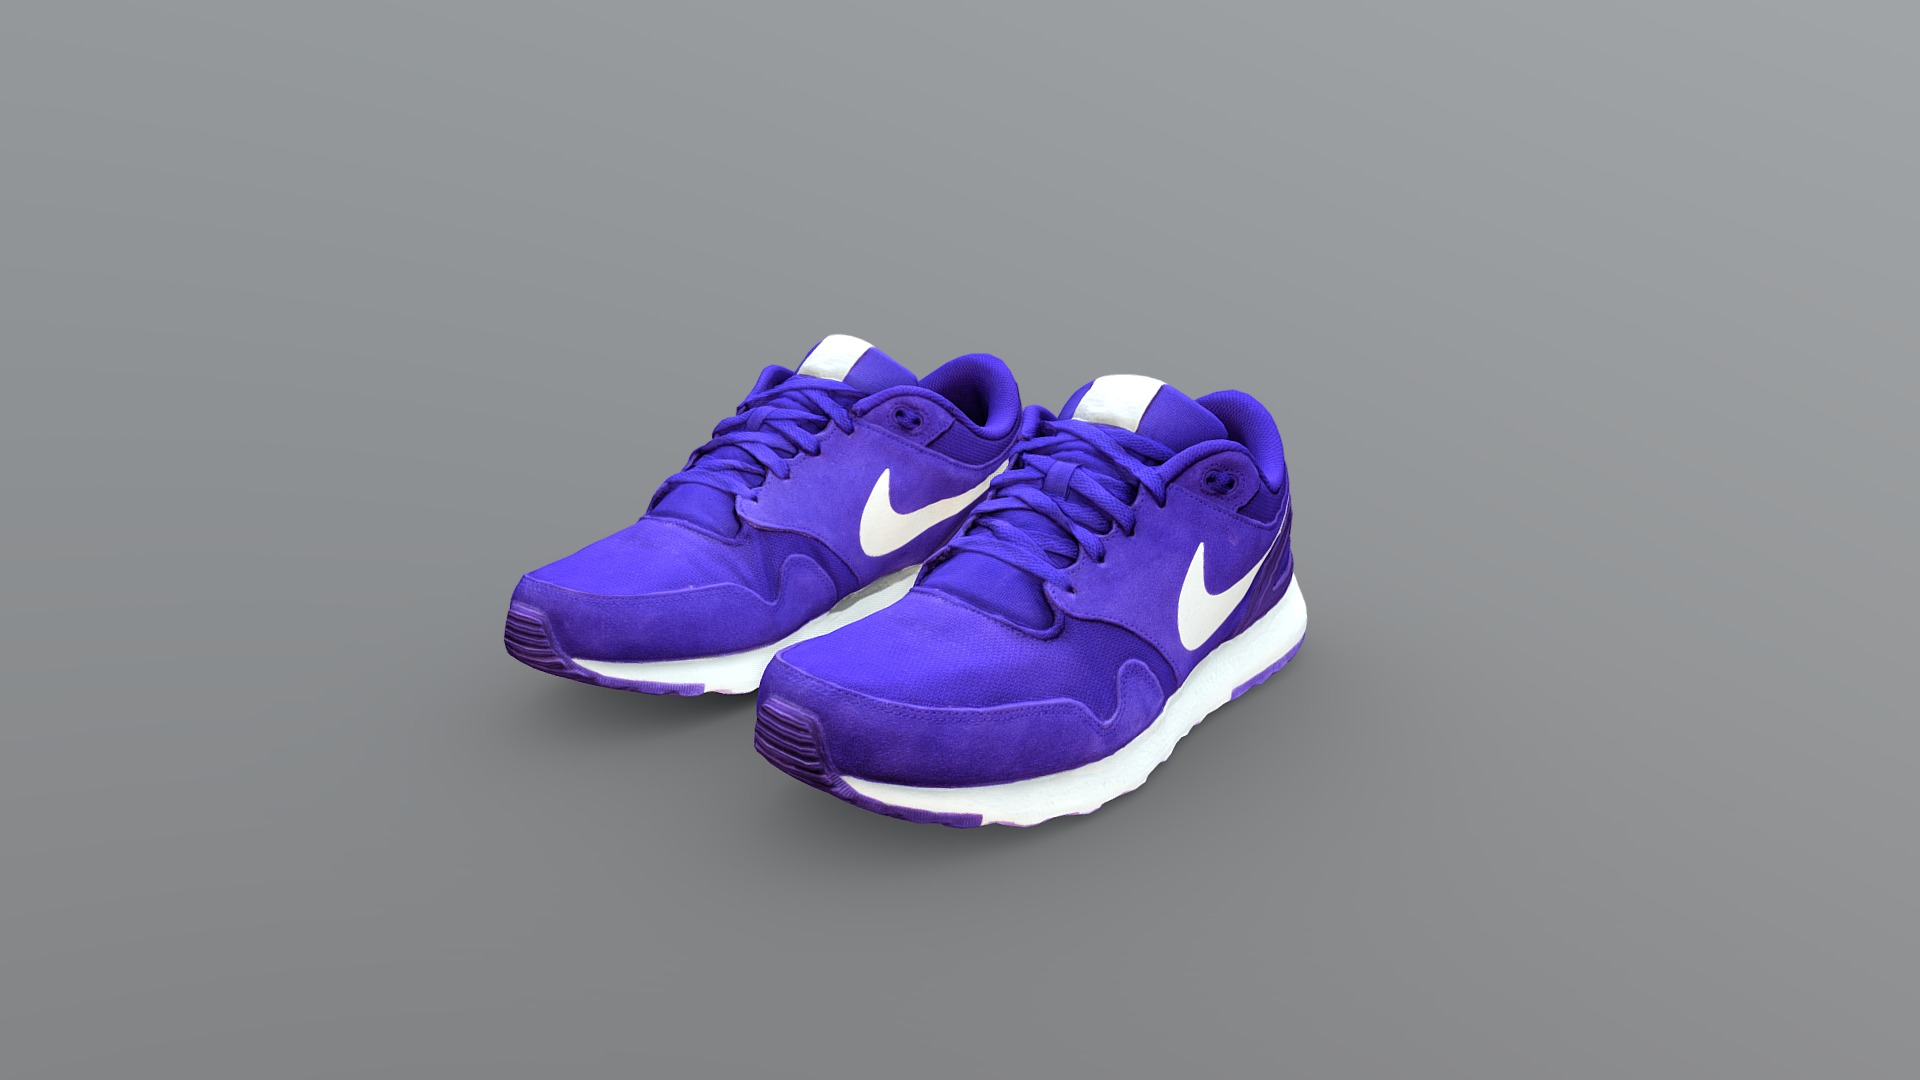 3D model Nike Shoes - This is a 3D model of the Nike Shoes. The 3D model is about a pair of purple shoes.